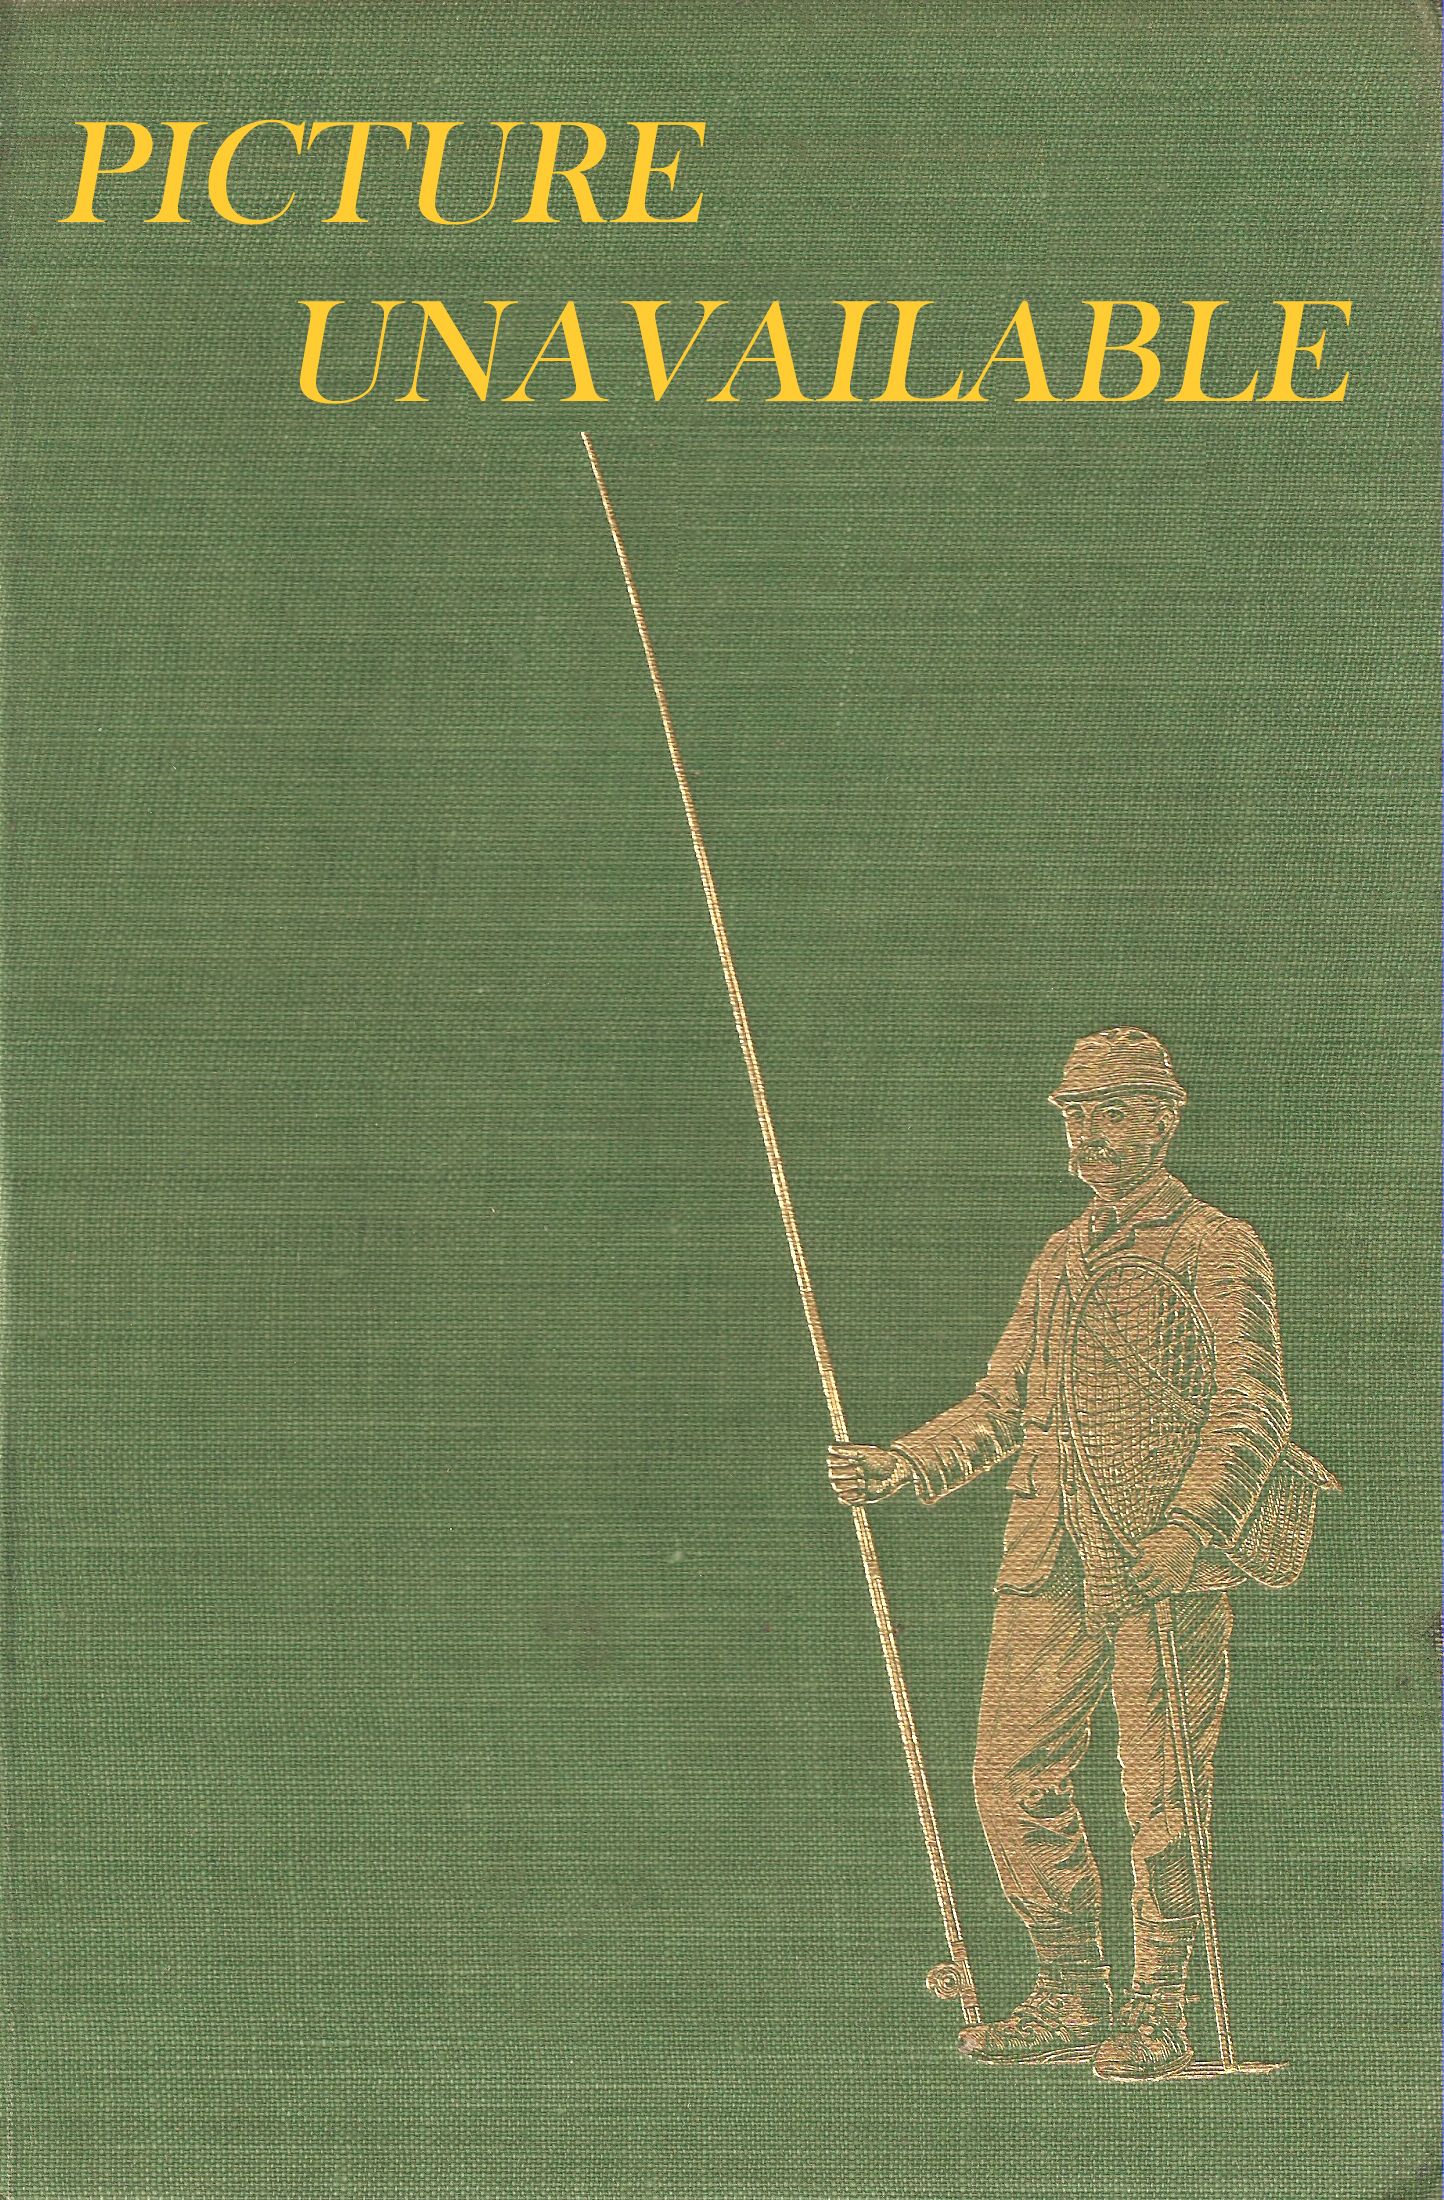 RATTING AND RABBITING FOR AMATEUR GAMEKEEPERS. By Guy N. Smith. With line drawings by Pat Lakin.